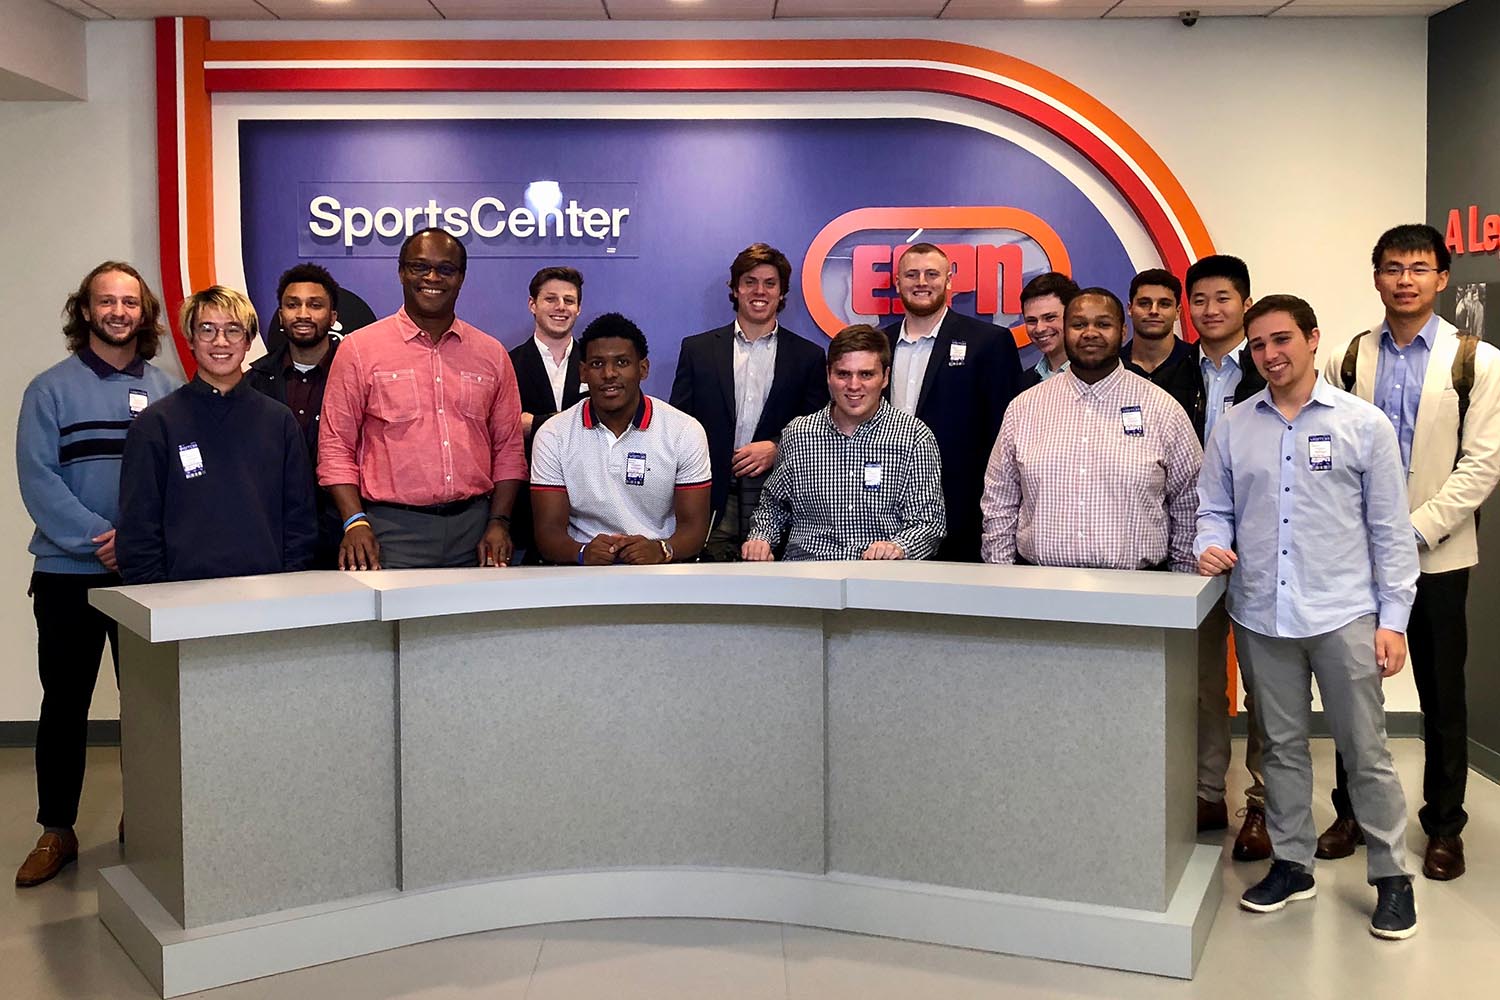 On Oct. 18, 14 students visited the ESPN campus in Bristol, Conn. Students spent time with Rob King ’84 hearing about his career in journalism and viewing some of his current video projects and participating in a full studio tour including watching the taping of segments for SportsCenter.